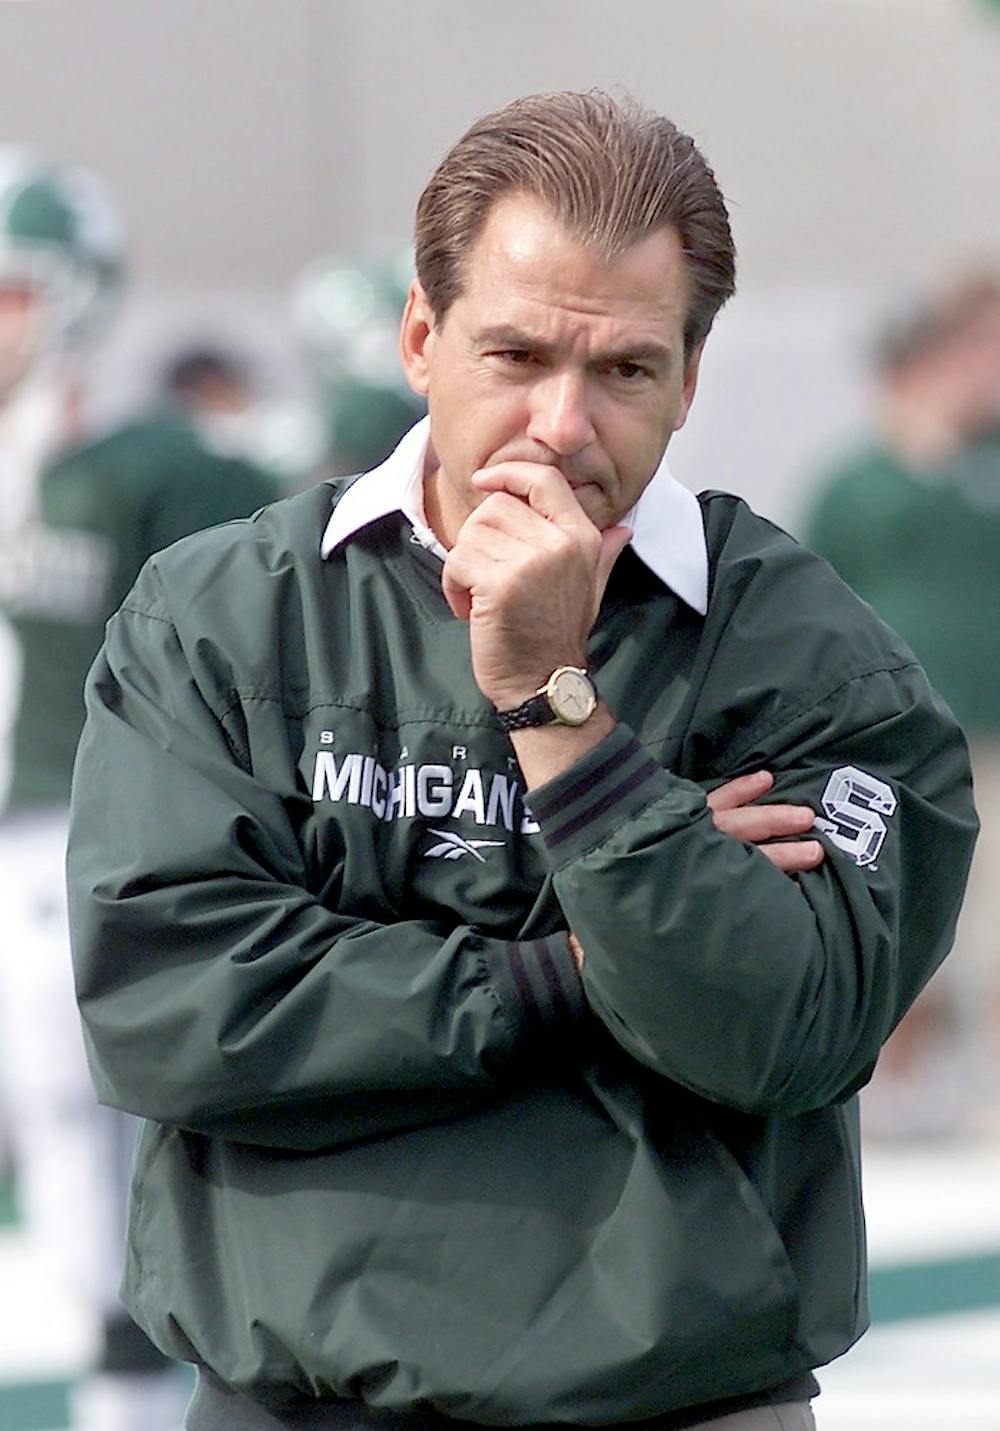 <p>MSU Head Coach Nick Saban passes along the end zone while the Spartans warm up before the game against University of Michigan in Spartan Stadium on Oct. 10, 1999. The Spartans defeated the Wolverines 34-31 and are now 6-0. Jennifer Jankowski/The State News</p>